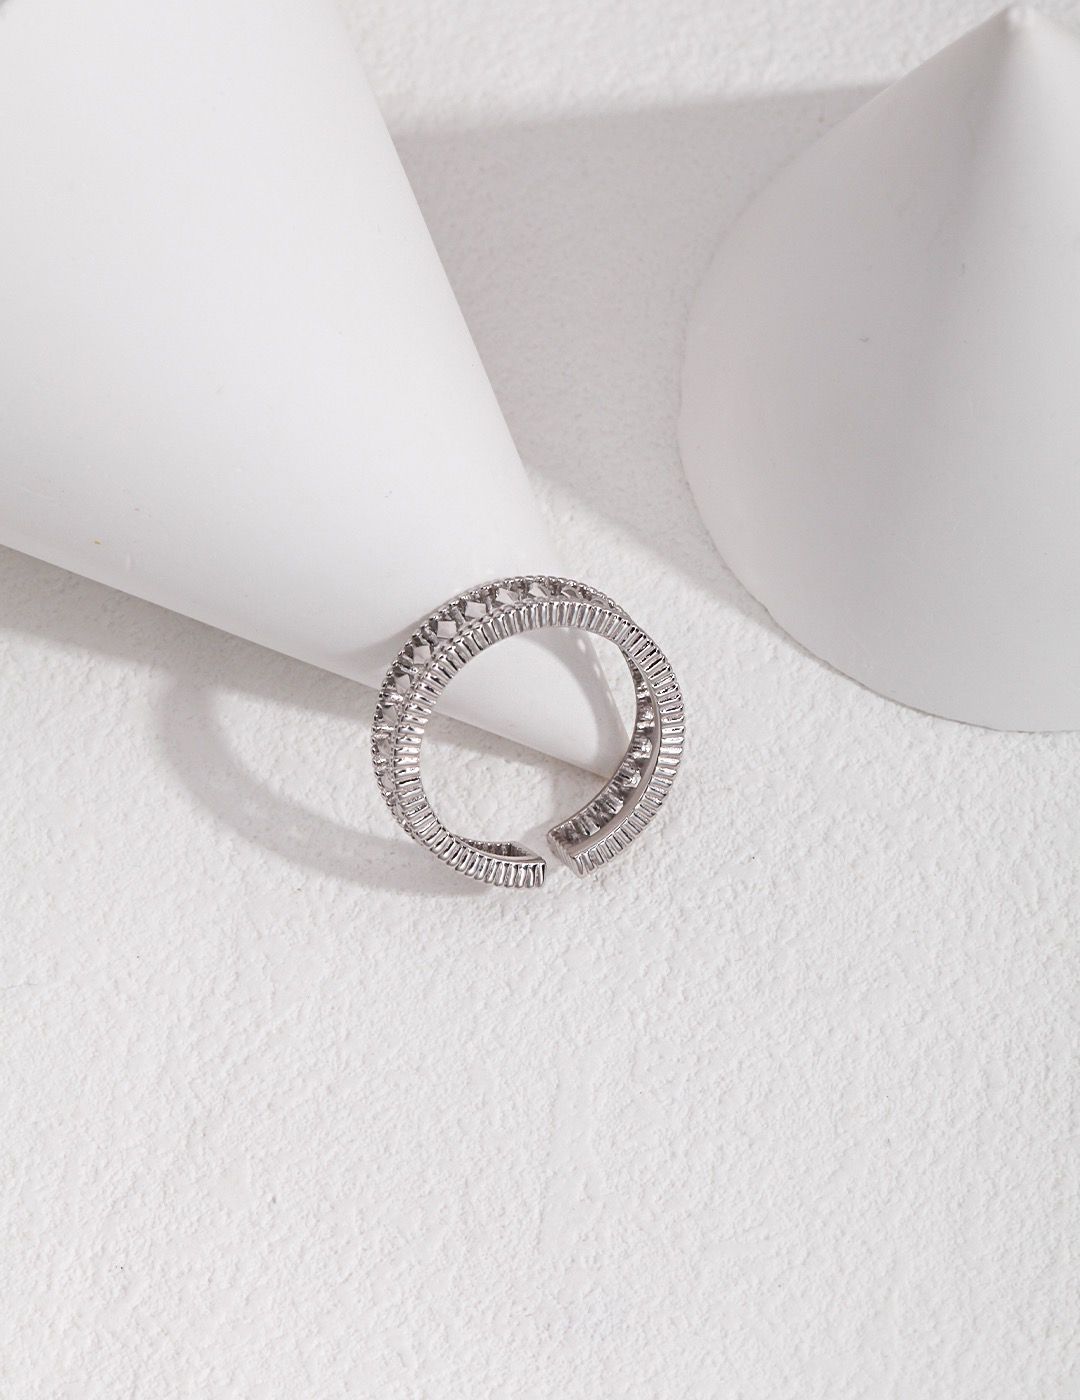 Minimalist silver band ring with clean lines and understated elegance